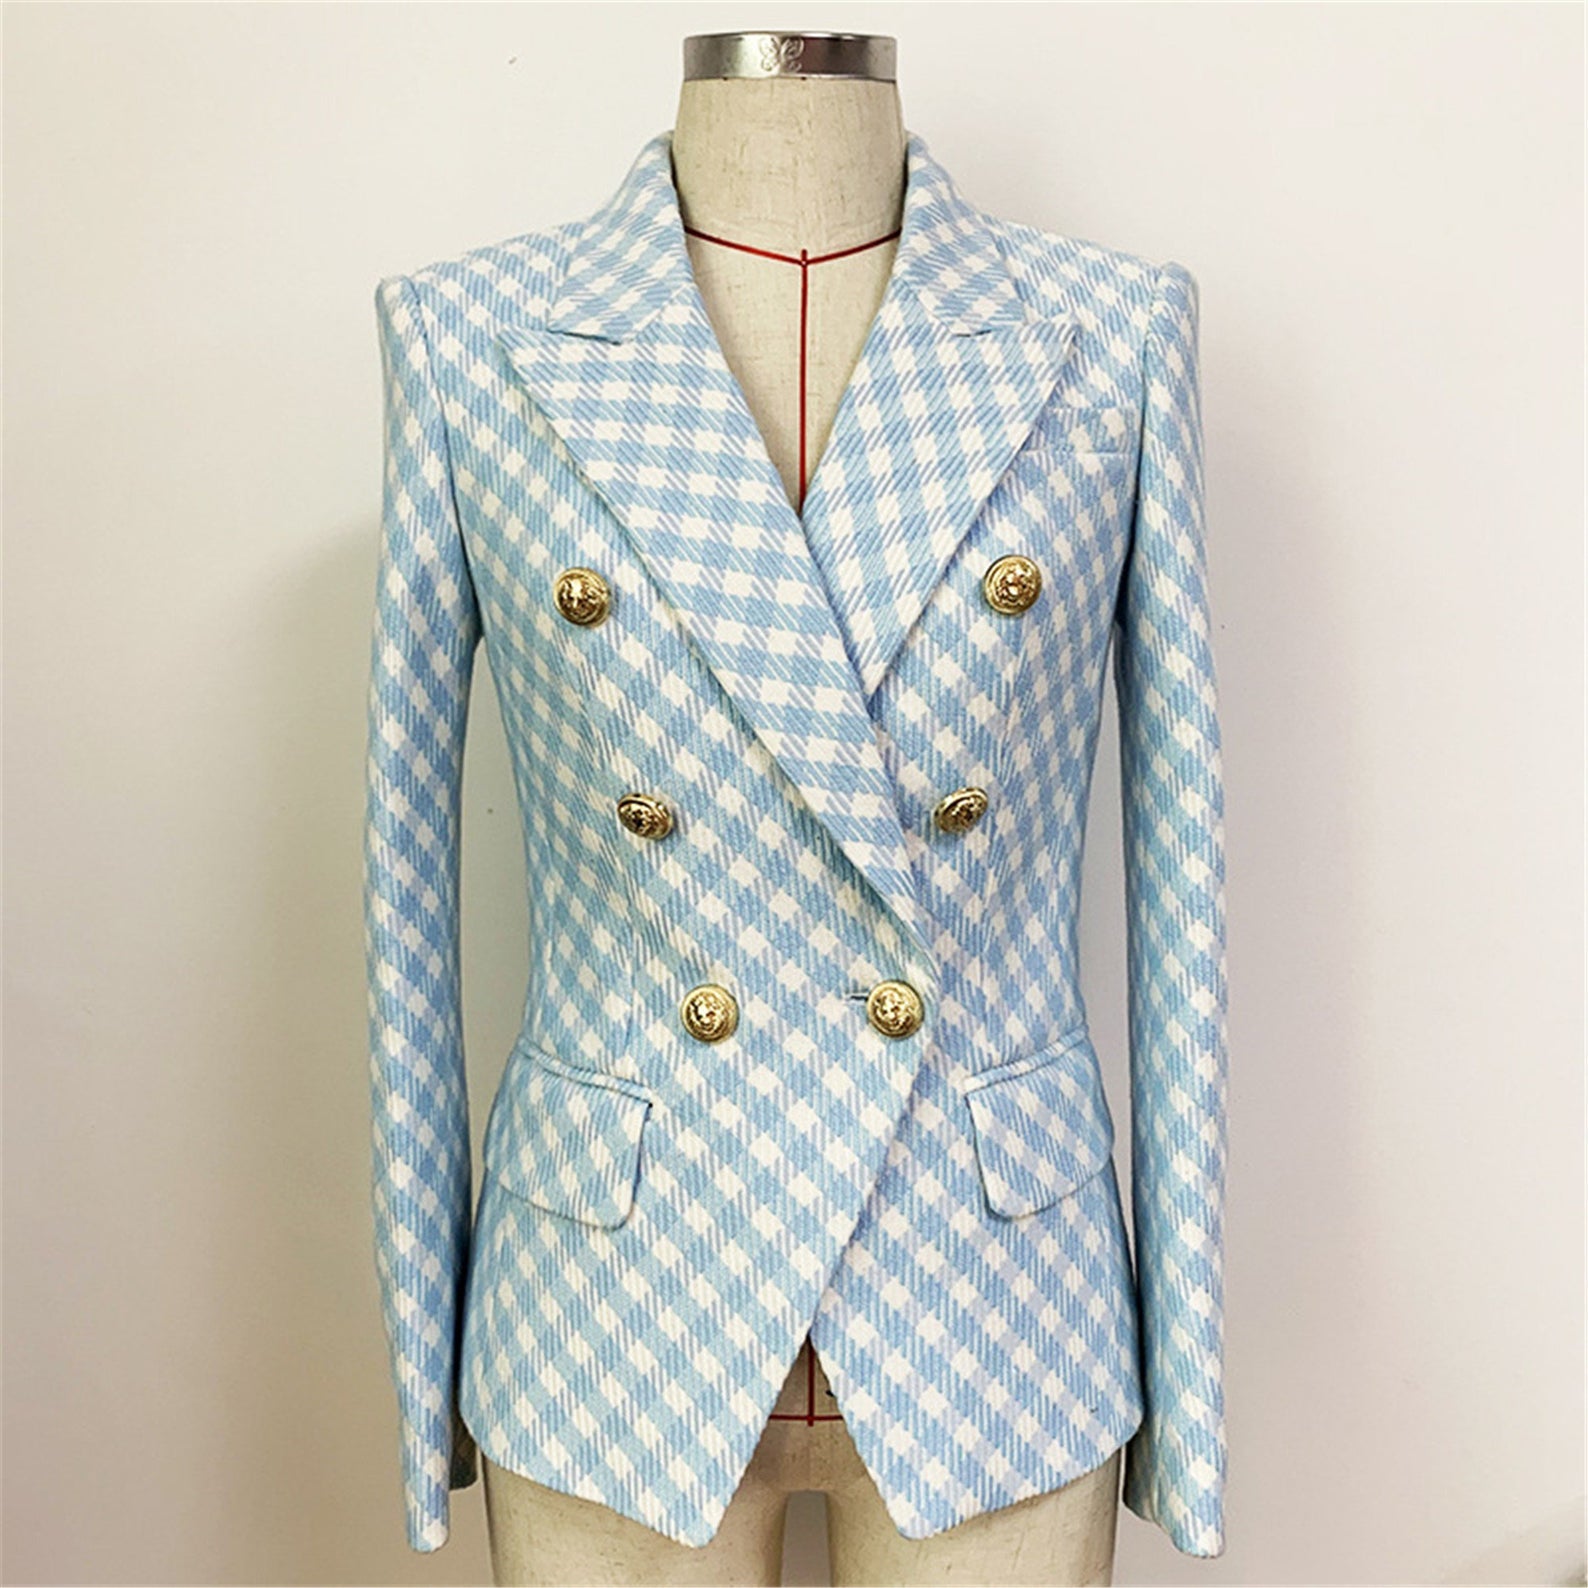 Women's Blazer Blue Checked Fitted Golden Lion Buttons Luxury   Quick International Service!  Blazer Blue Checked Fitted Golden Lion Buttons Luxury ,can wear it for College Inaugurations, Ceremony and Official use. The comfort of our ladies tailored suits are unsurpassed, as is the confidence it can provide its wearer in knowing that they are looking at their absolute best.  Size: UK 4-14/ EU 32-42/ US 0-10